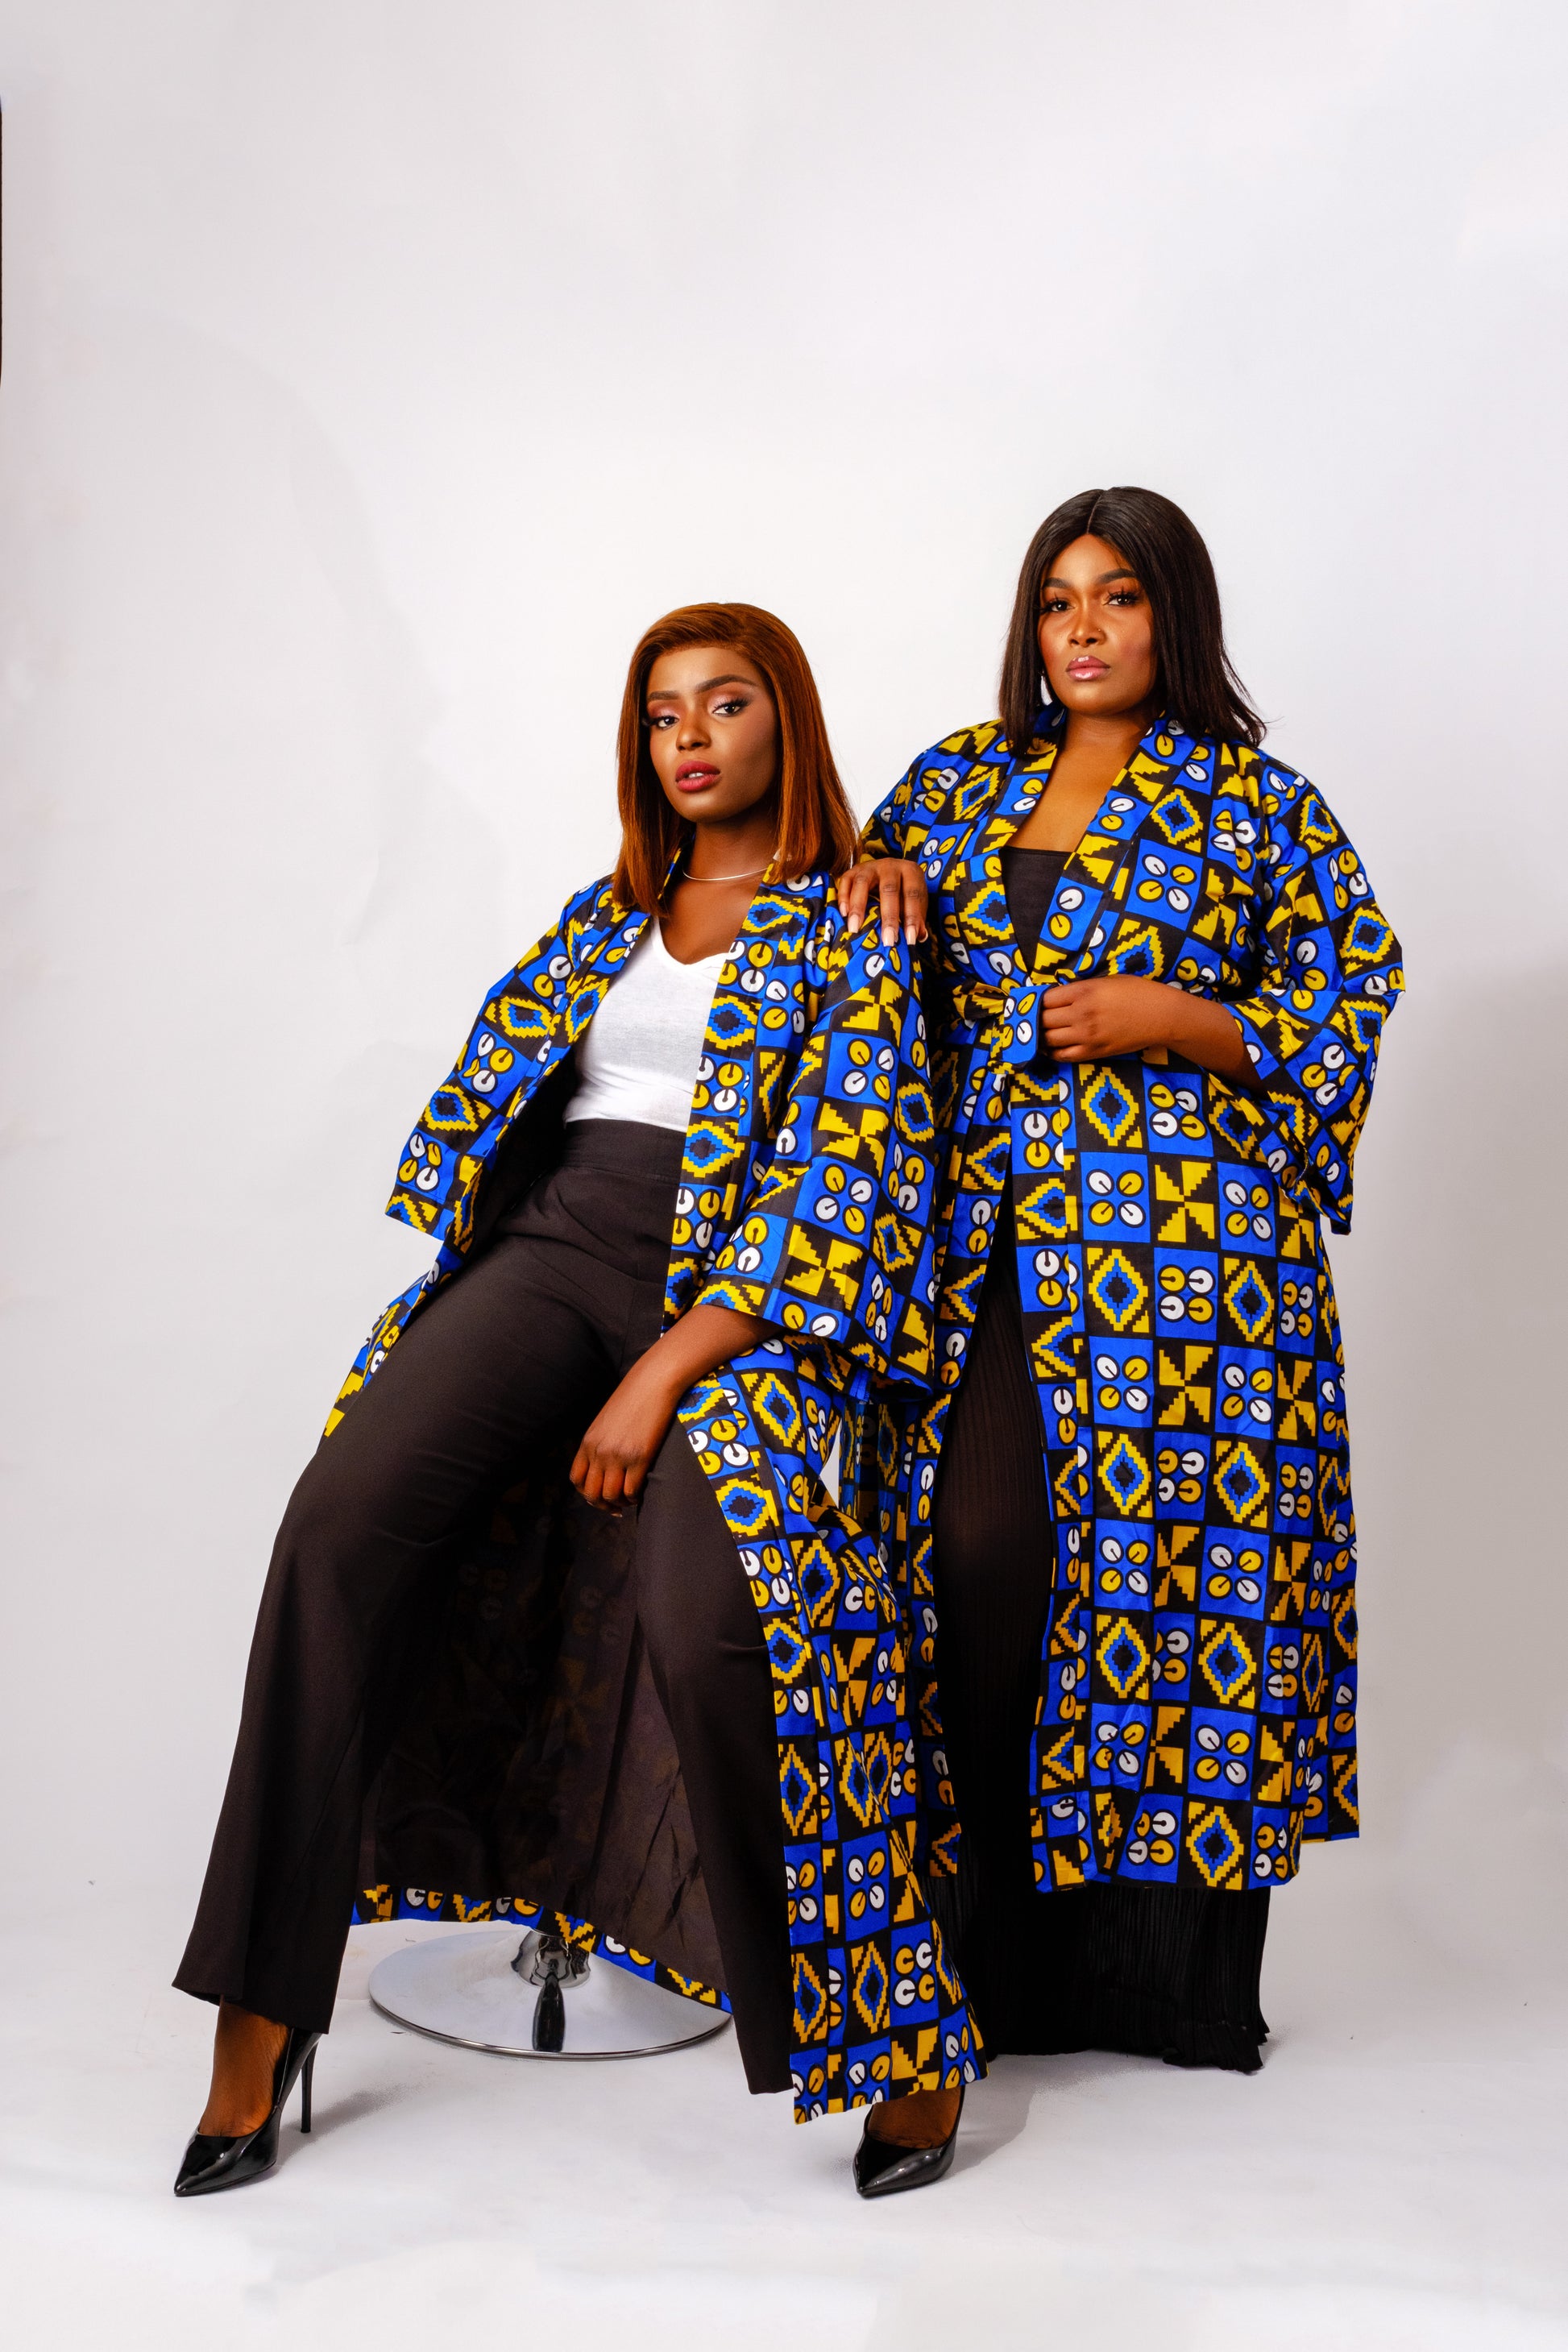 Blue African print (Ankara) kimono made of a lightweight cotton material that features a mix of geometric tribal designs